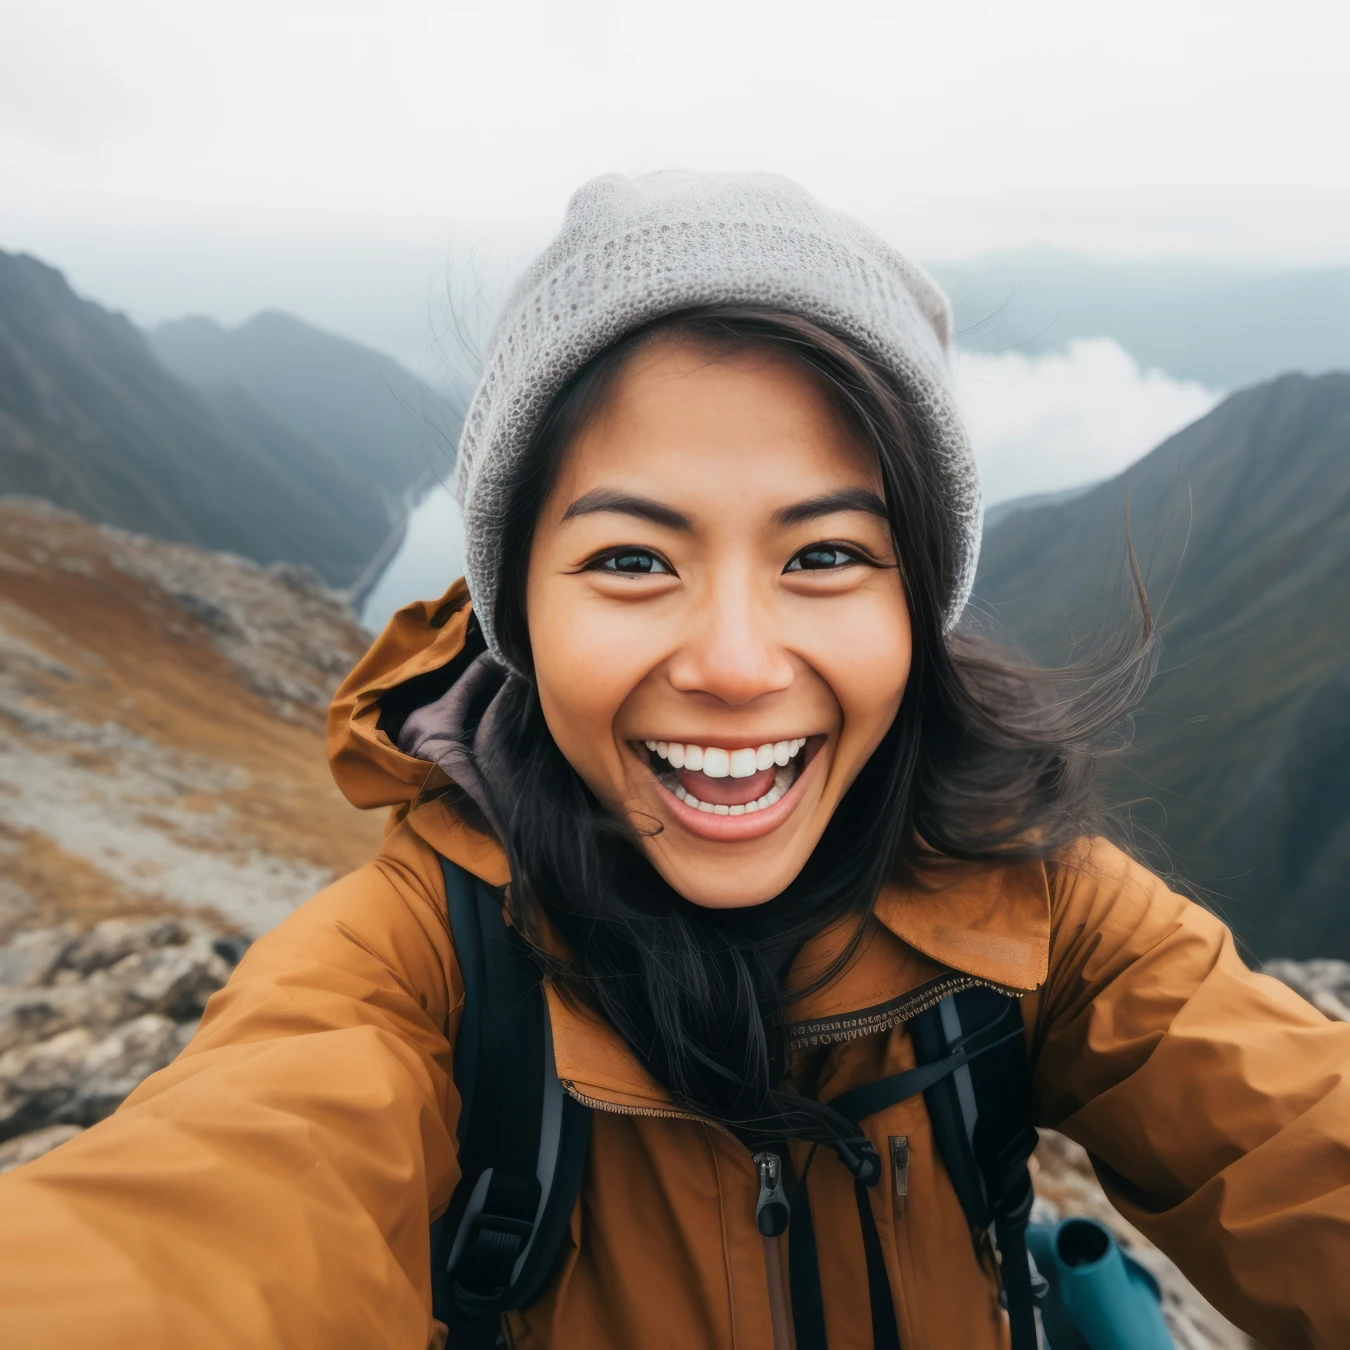 Hiker taking a selfie at the top of a mountain